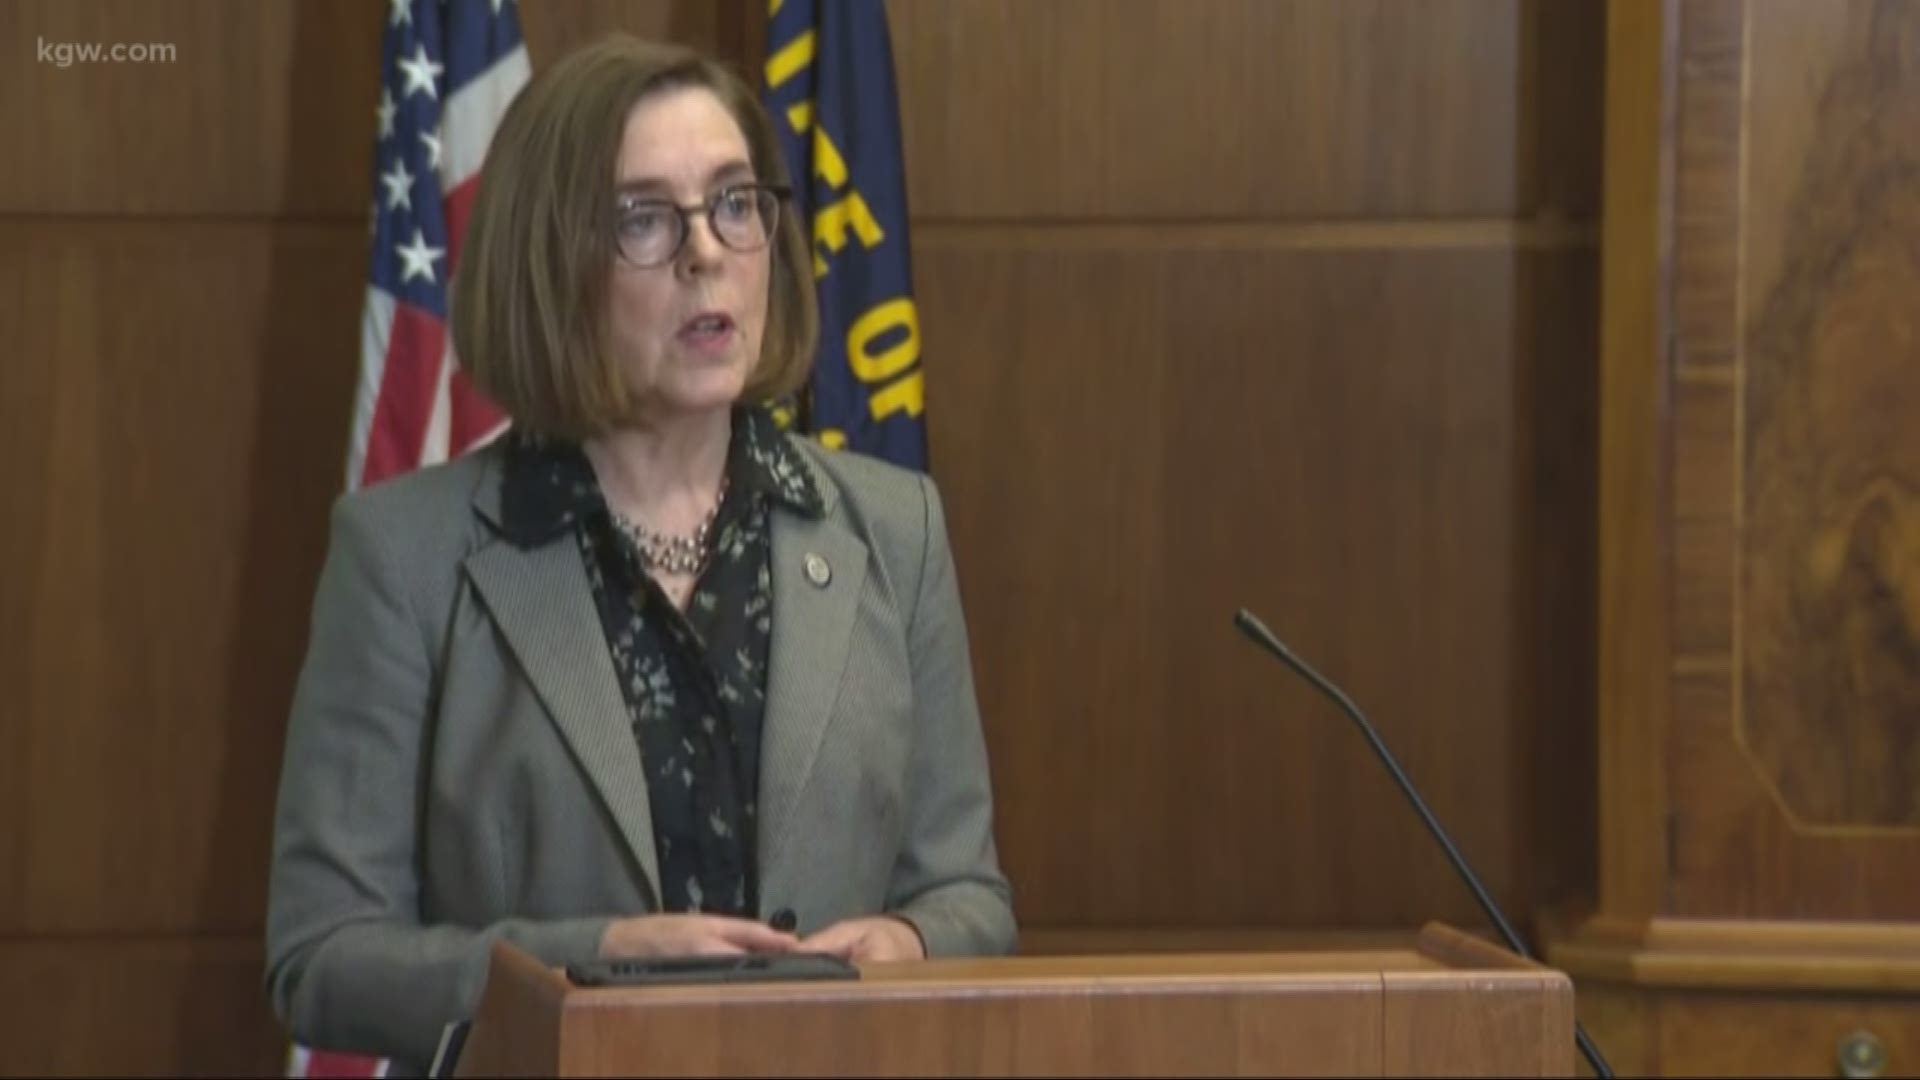 Oregon Governor Kate Brown said she’s prepared to use her executive powers to lower carbon emissions.